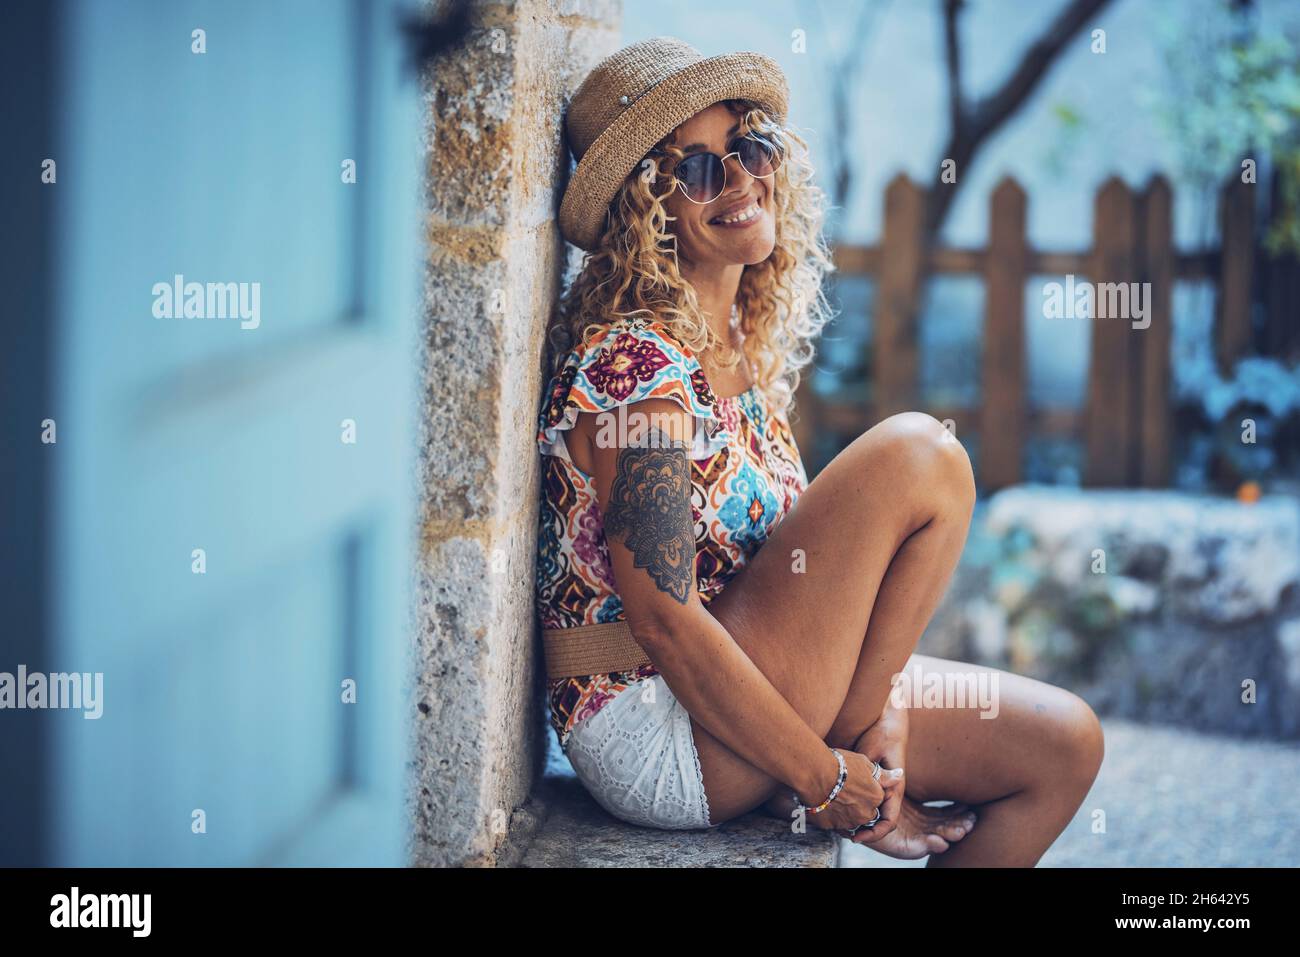 portrait of beautiful smiling hipster young woman in sunglasses and straw hat sitting outdoors. stylish tattooed woman in good mood spending leisure time relaxing outdoors Stock Photo